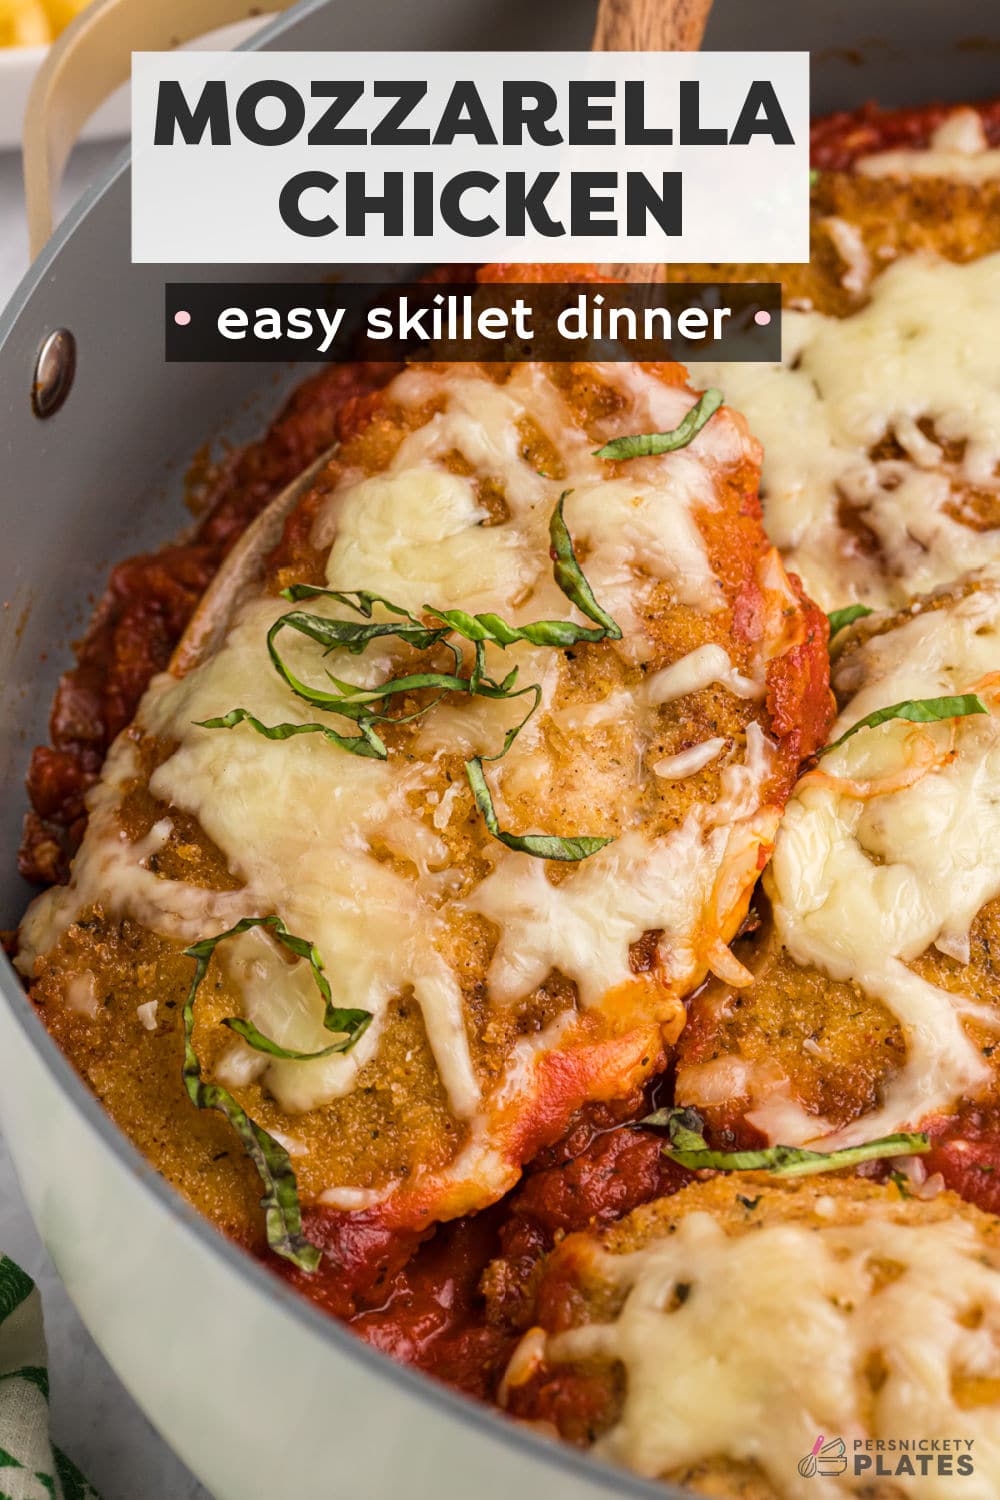 The aroma of this easy mozzarella chicken skillet is enough to have your whole family drooling! Crispy breaded chicken submerged in a rich homemade tomato sauce then smothered in melted mozzarella. This simple weeknight recipe is surprisingly easy to make using simple kitchen staples and is ready to serve with fettuccine in under 1 hour! | www.persnicketyplates.com